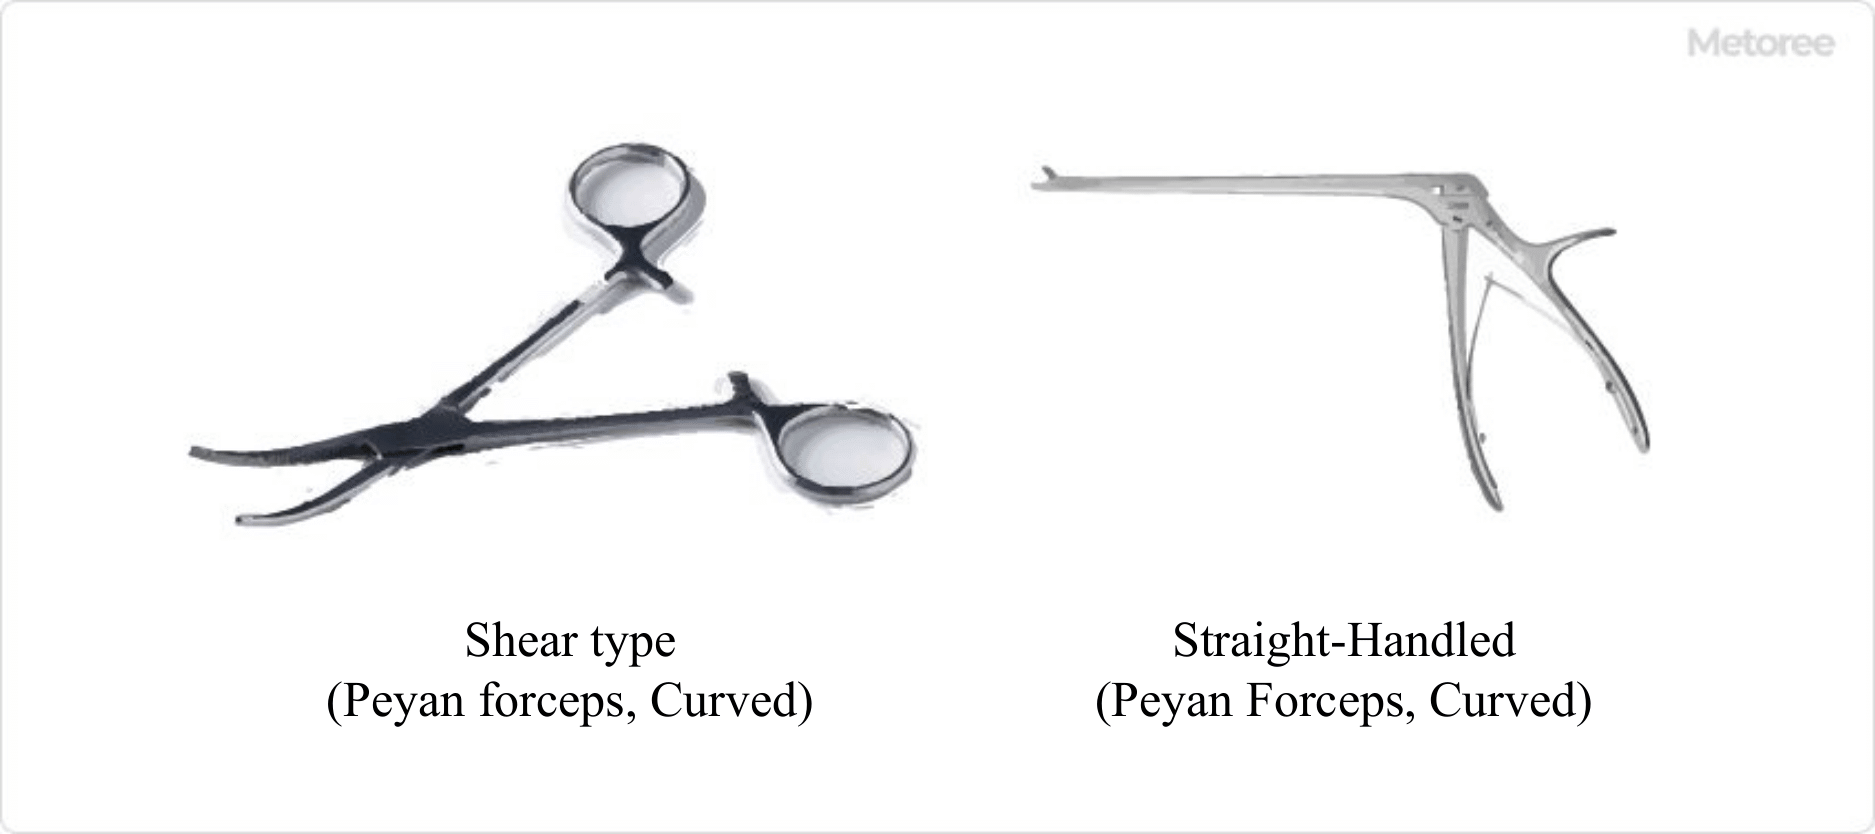 Figure 1. Image of a typical forceps